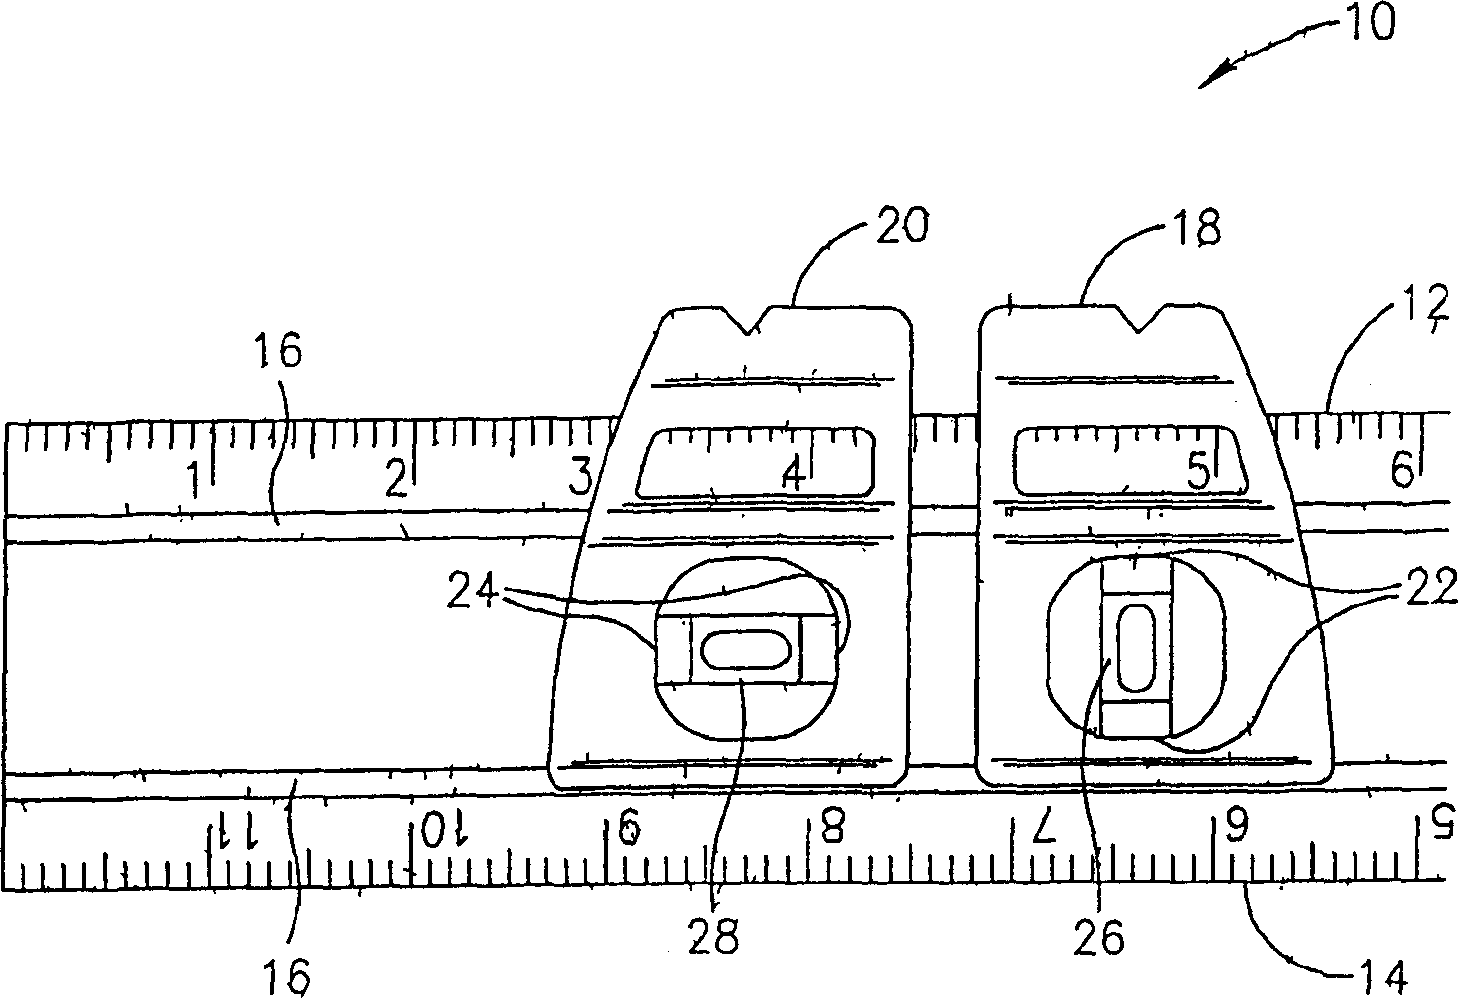 Measuring and leveling device and method of using same